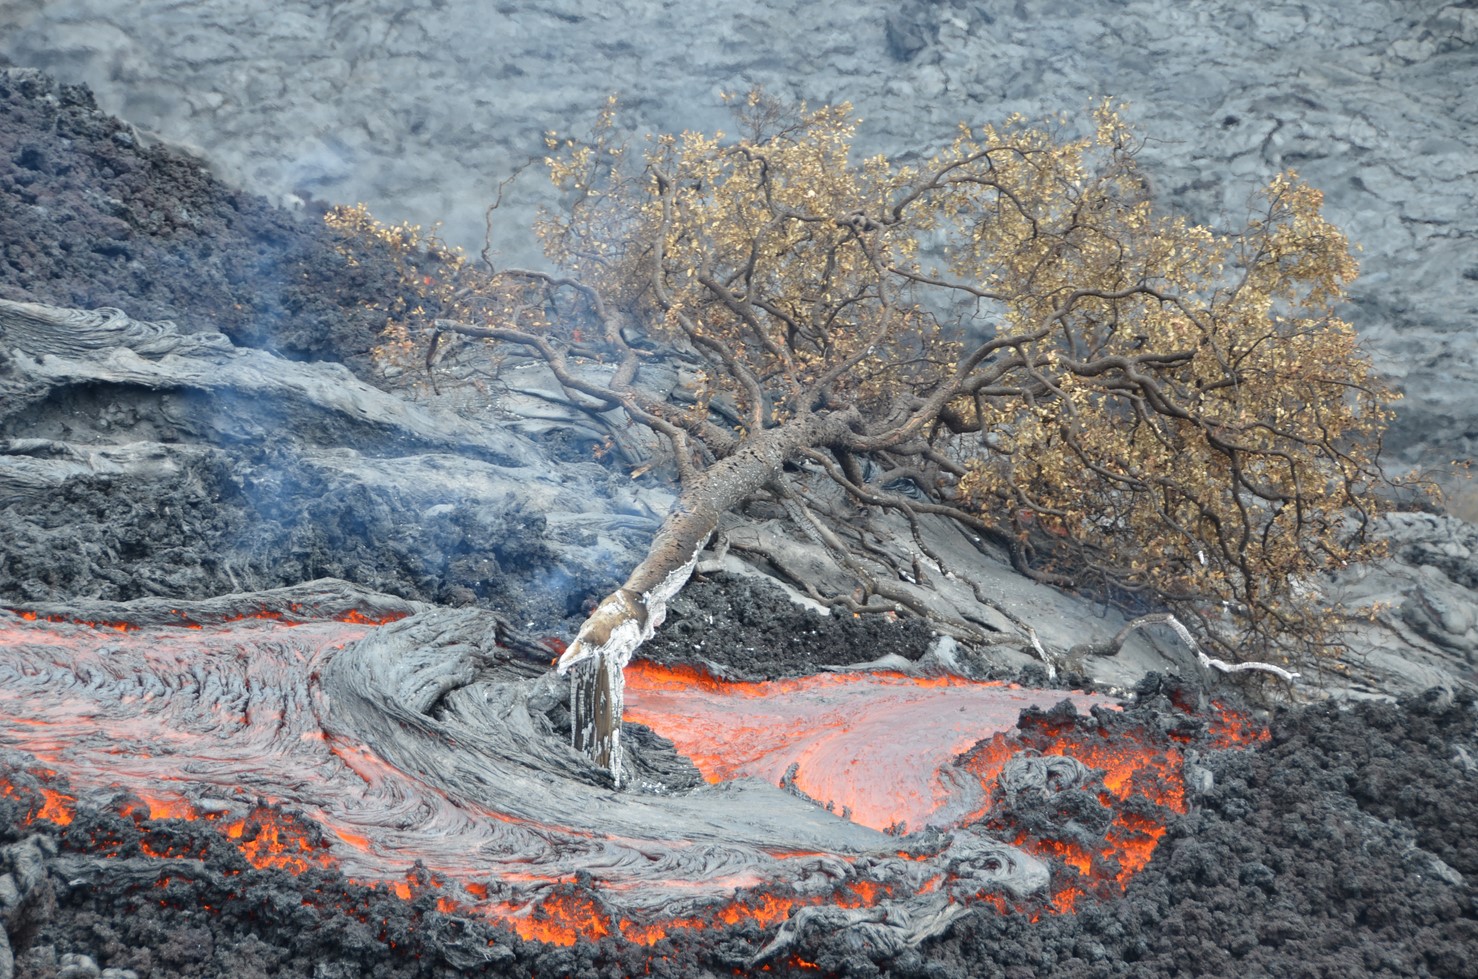 Photograph of lava engulfing a tree on Hawaii. Red hot lava has surrounded the base of a tree, which has fallen over. The crown of the tree sits on cooled lava to the side of the new lava flow. The leaves of the tree are brown, and the trunk appears to be scorched.